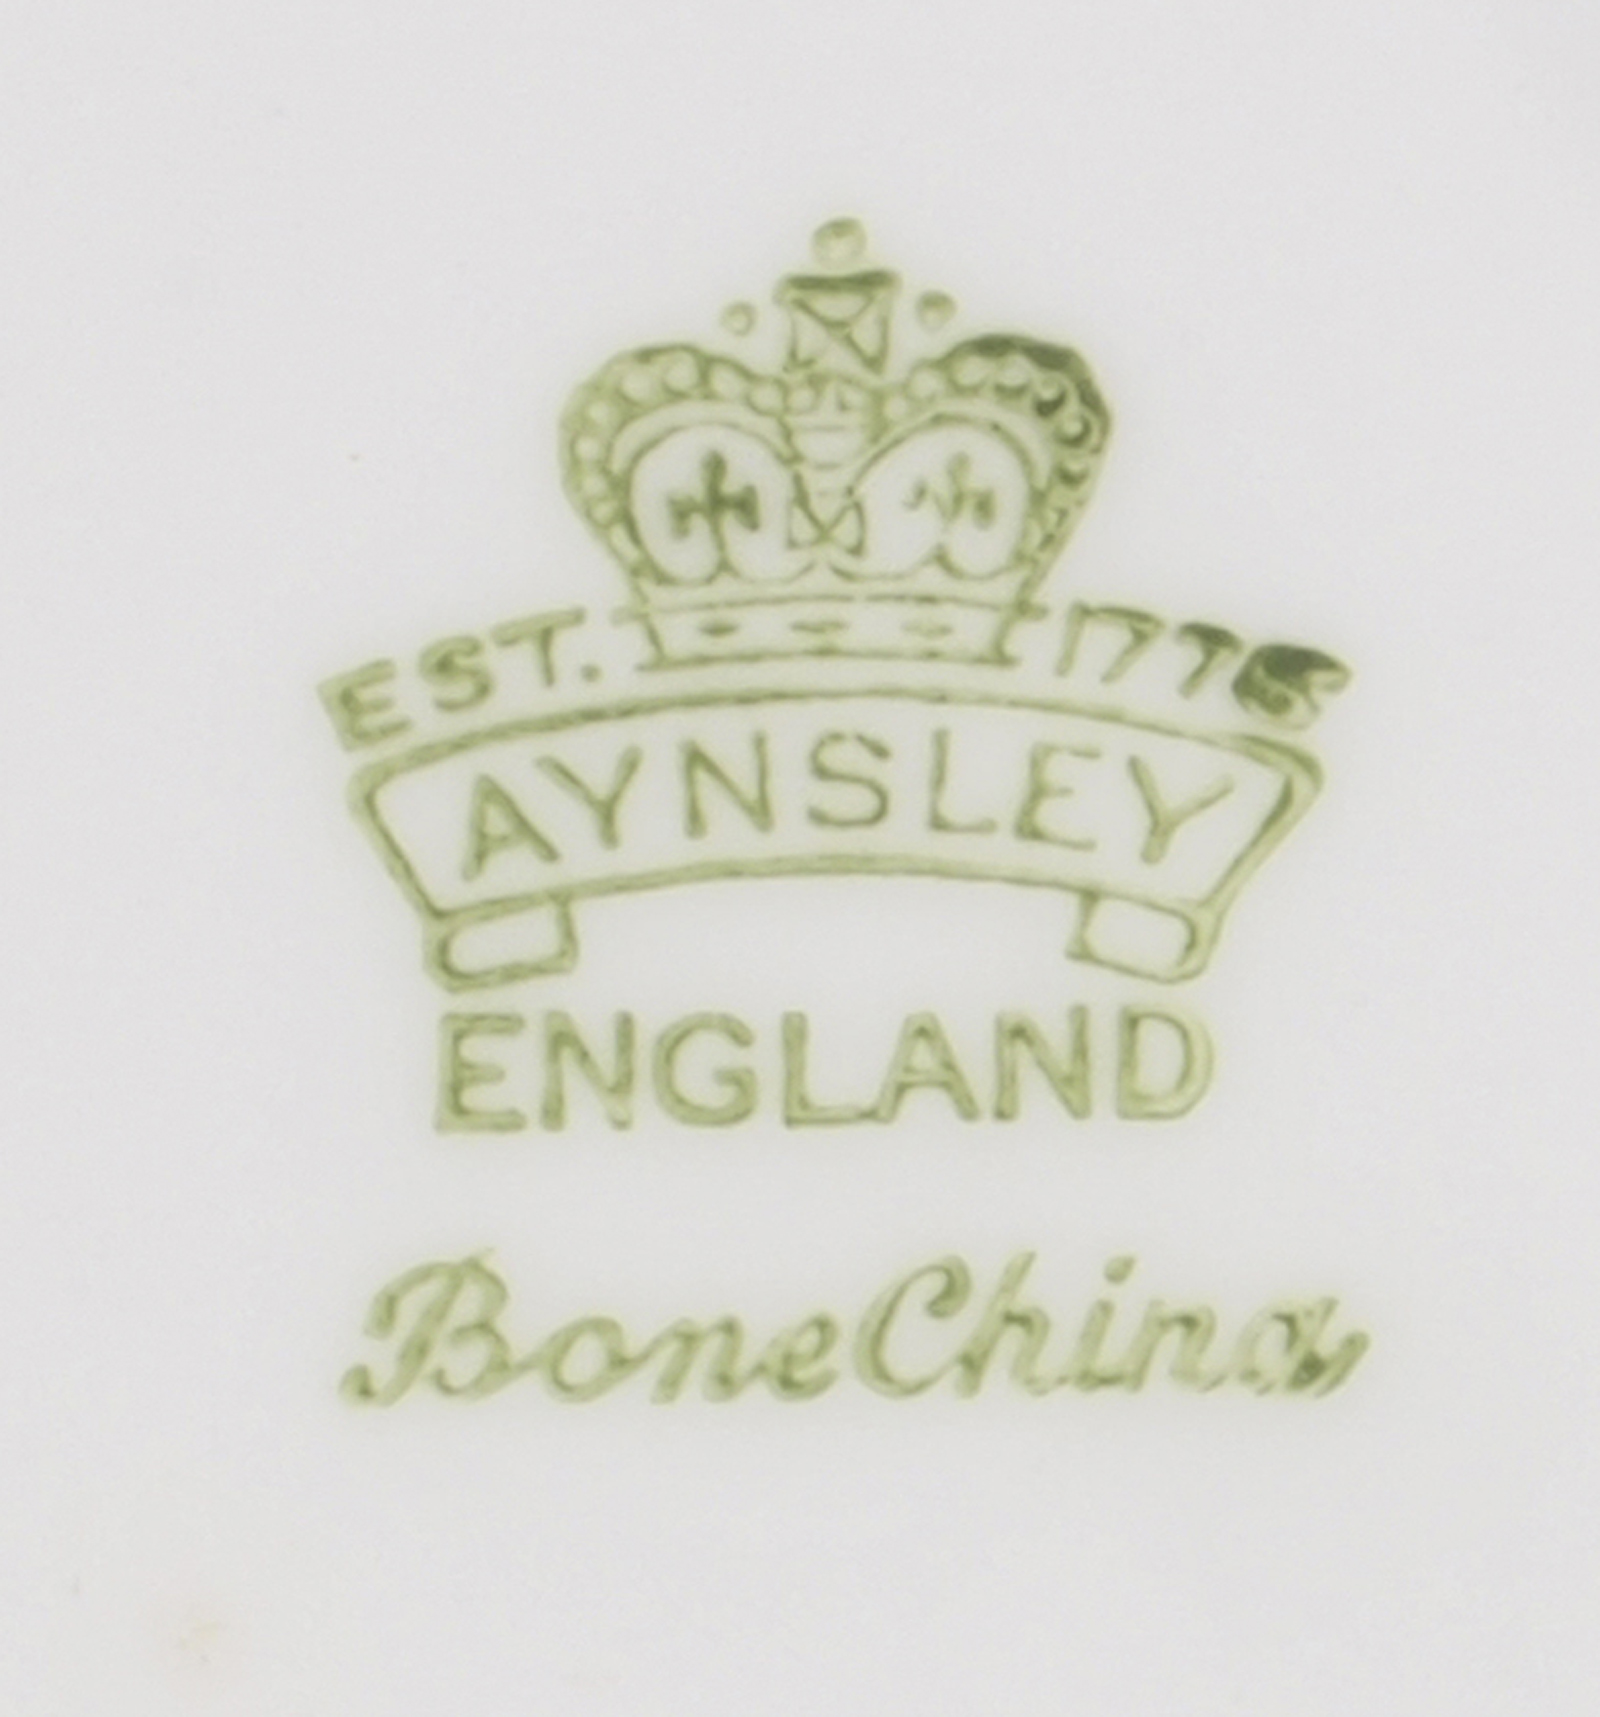 Ghid dating aynsley china backstamp, RECENT VIZUALIZATE